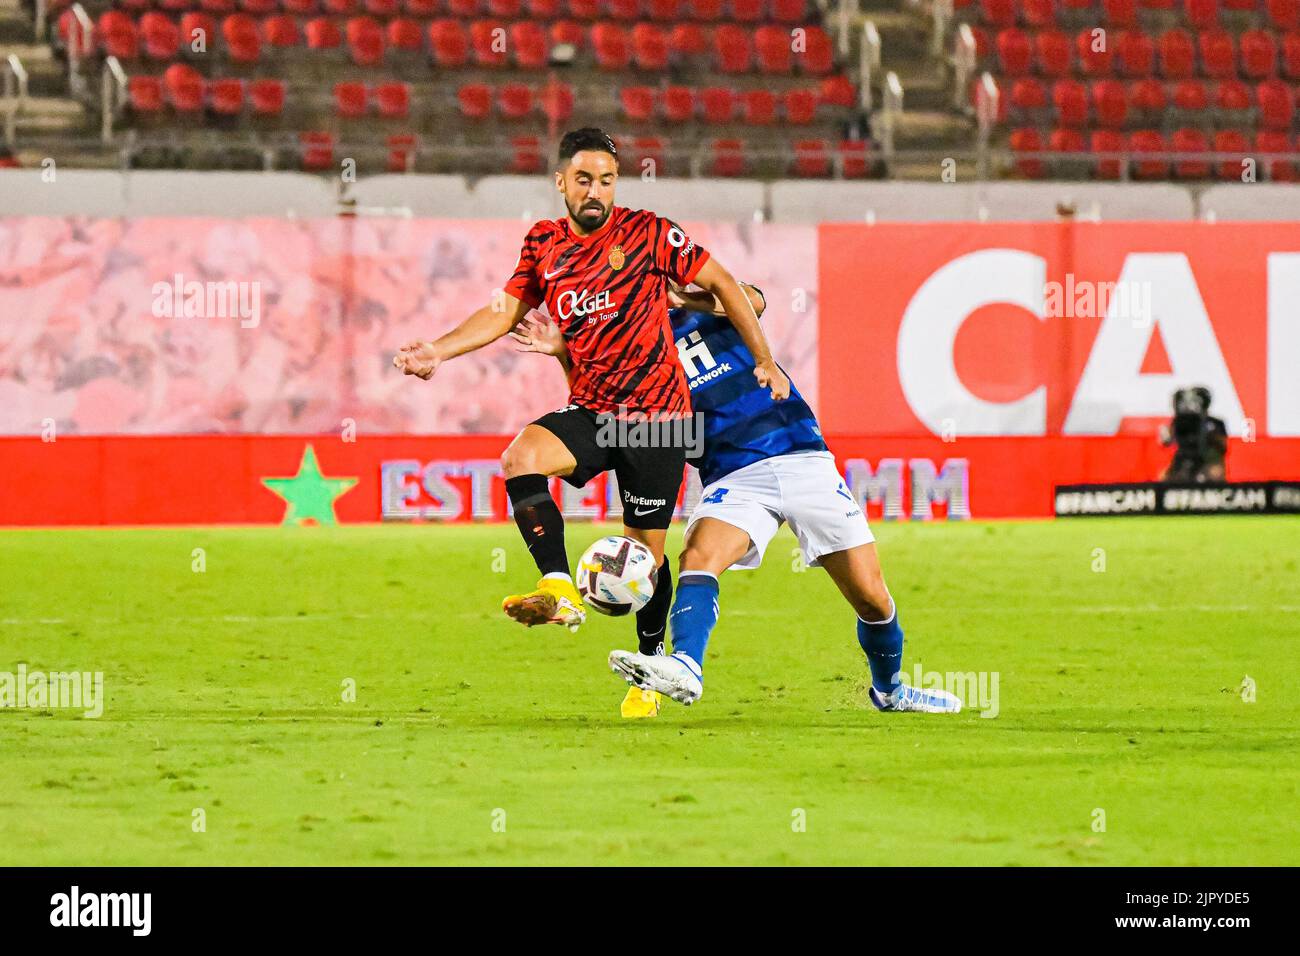 MALLORCA, SPAIN - AUGUST 20: Jaume Costa of RCD Mallorca in the match between RCD Mallorca and Real Betis of La Liga Santander on August 20, 2022 at Visit Mallorca Stadium Son Moix in Mallorca, Spain. (Photo by Samuel Carreño/PxImages) Stock Photo